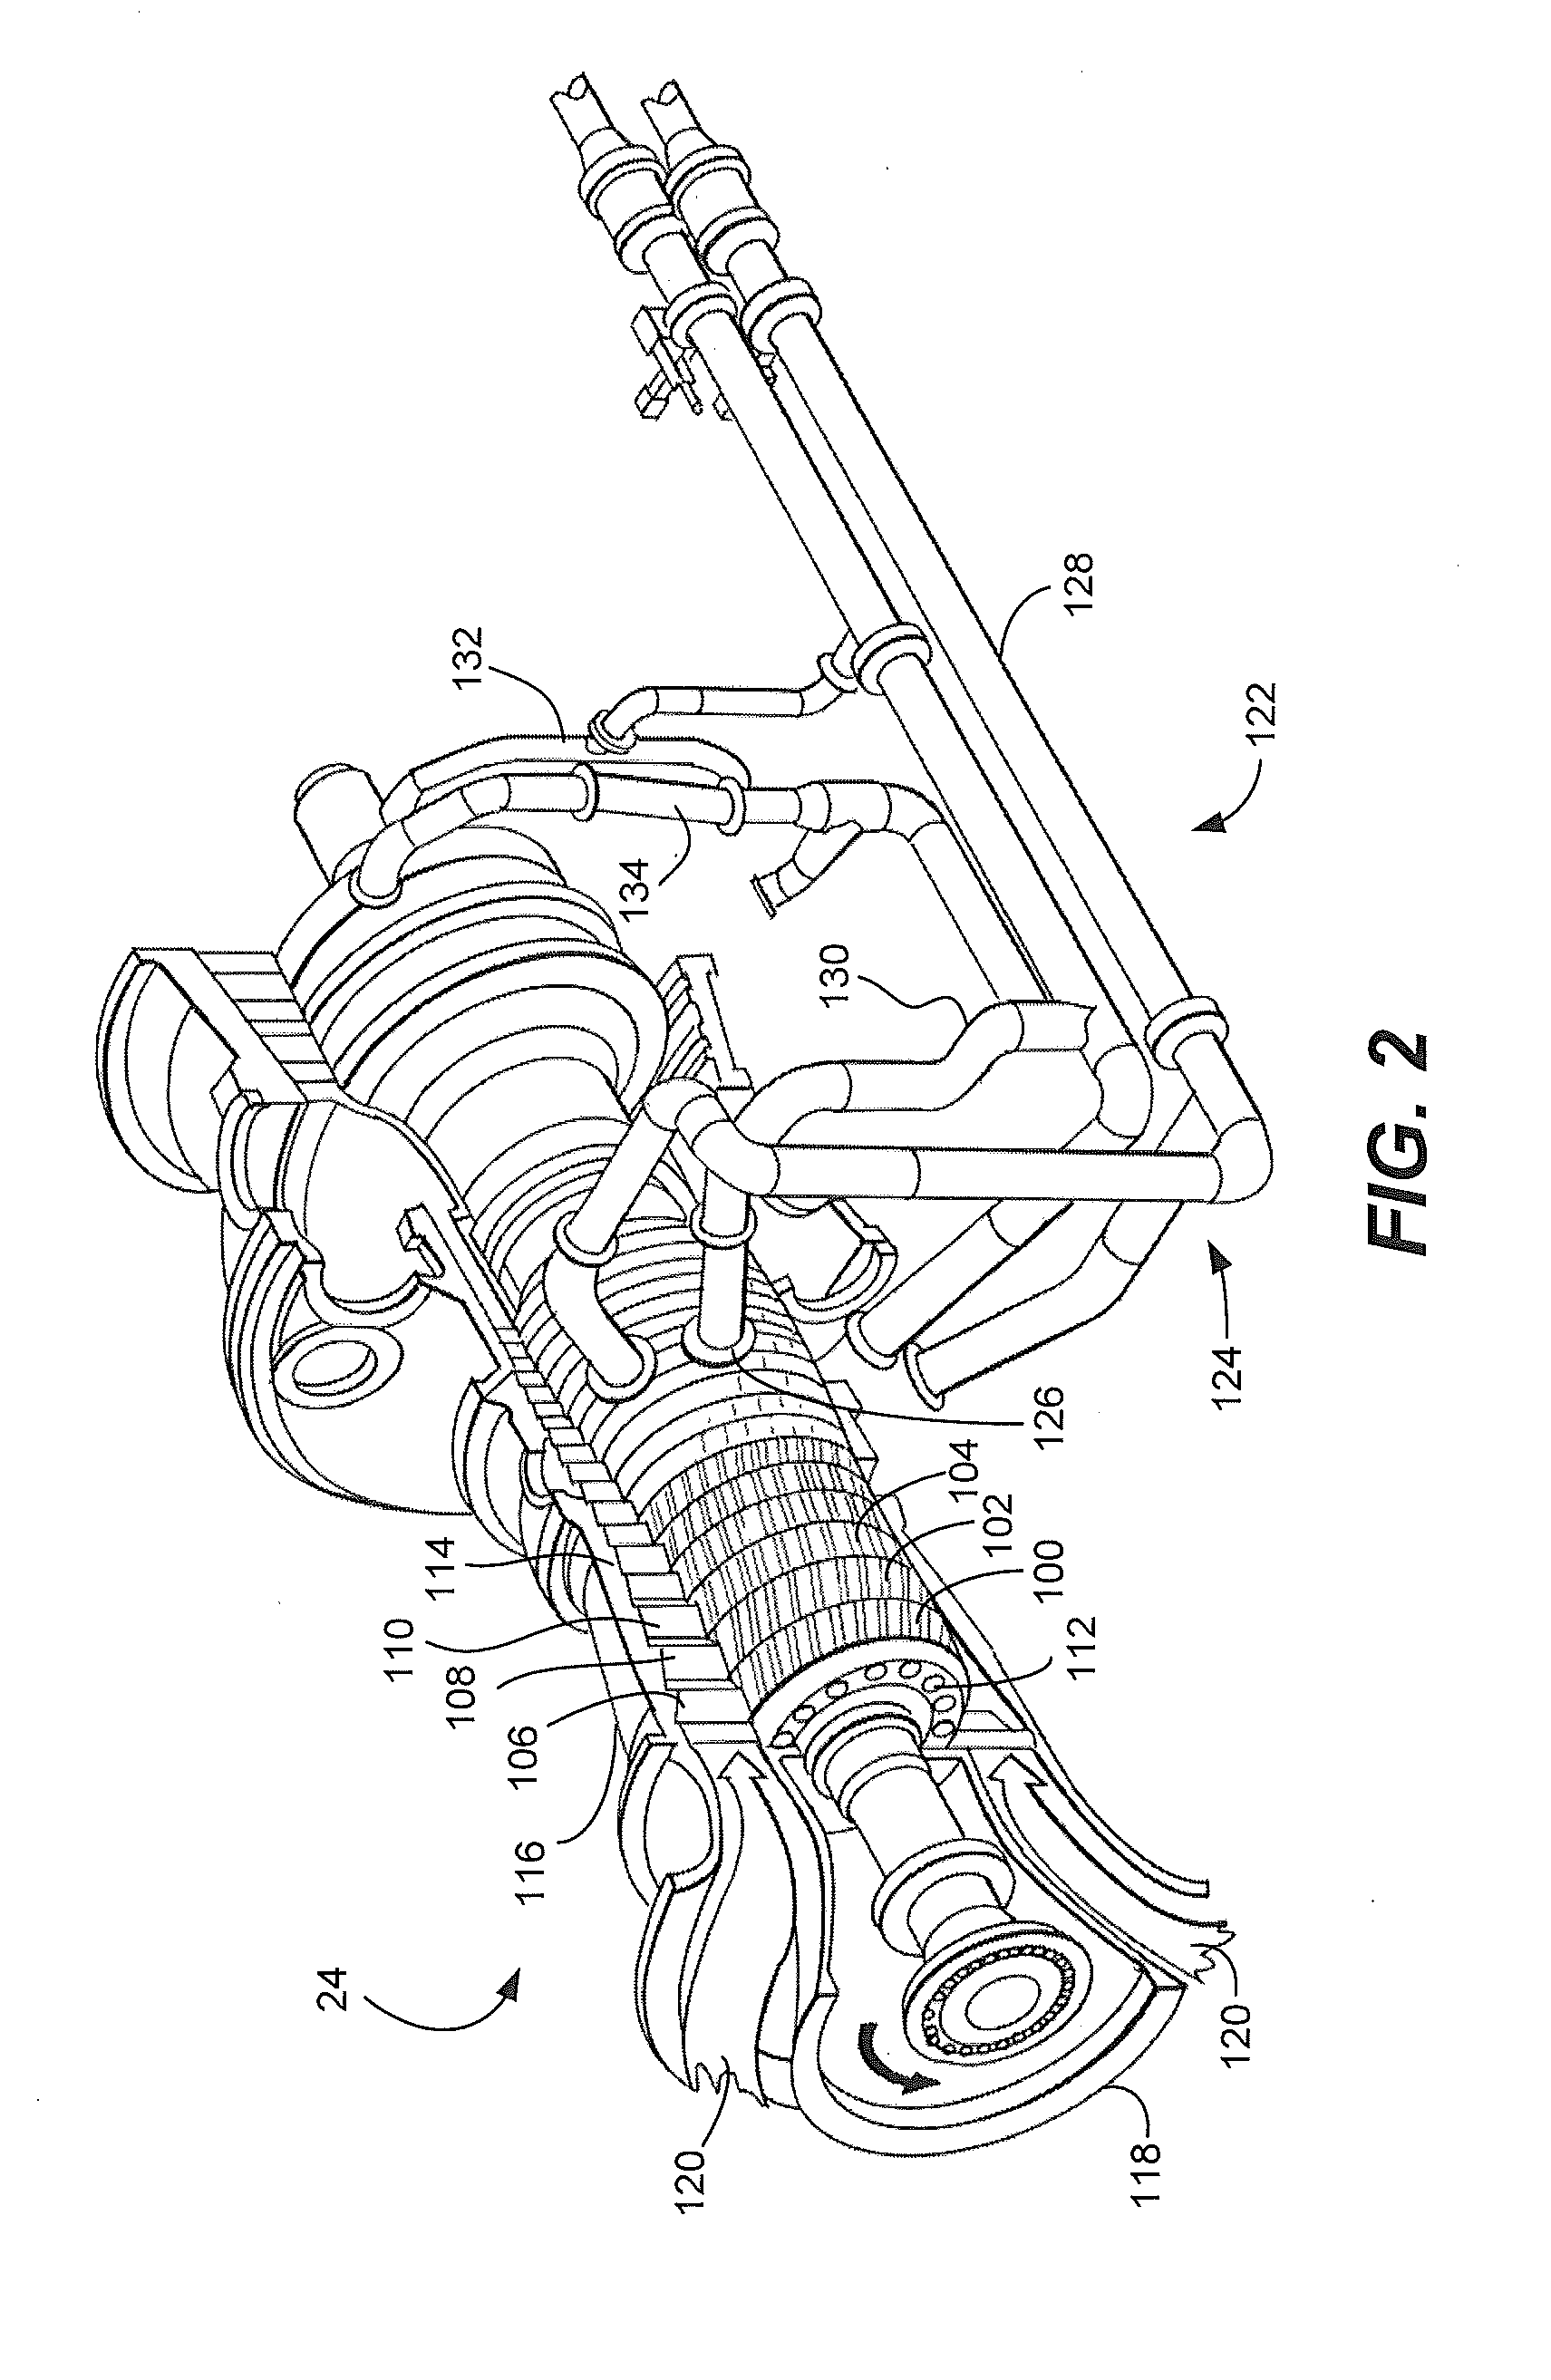 System and method for providing a wash treatment to a surface